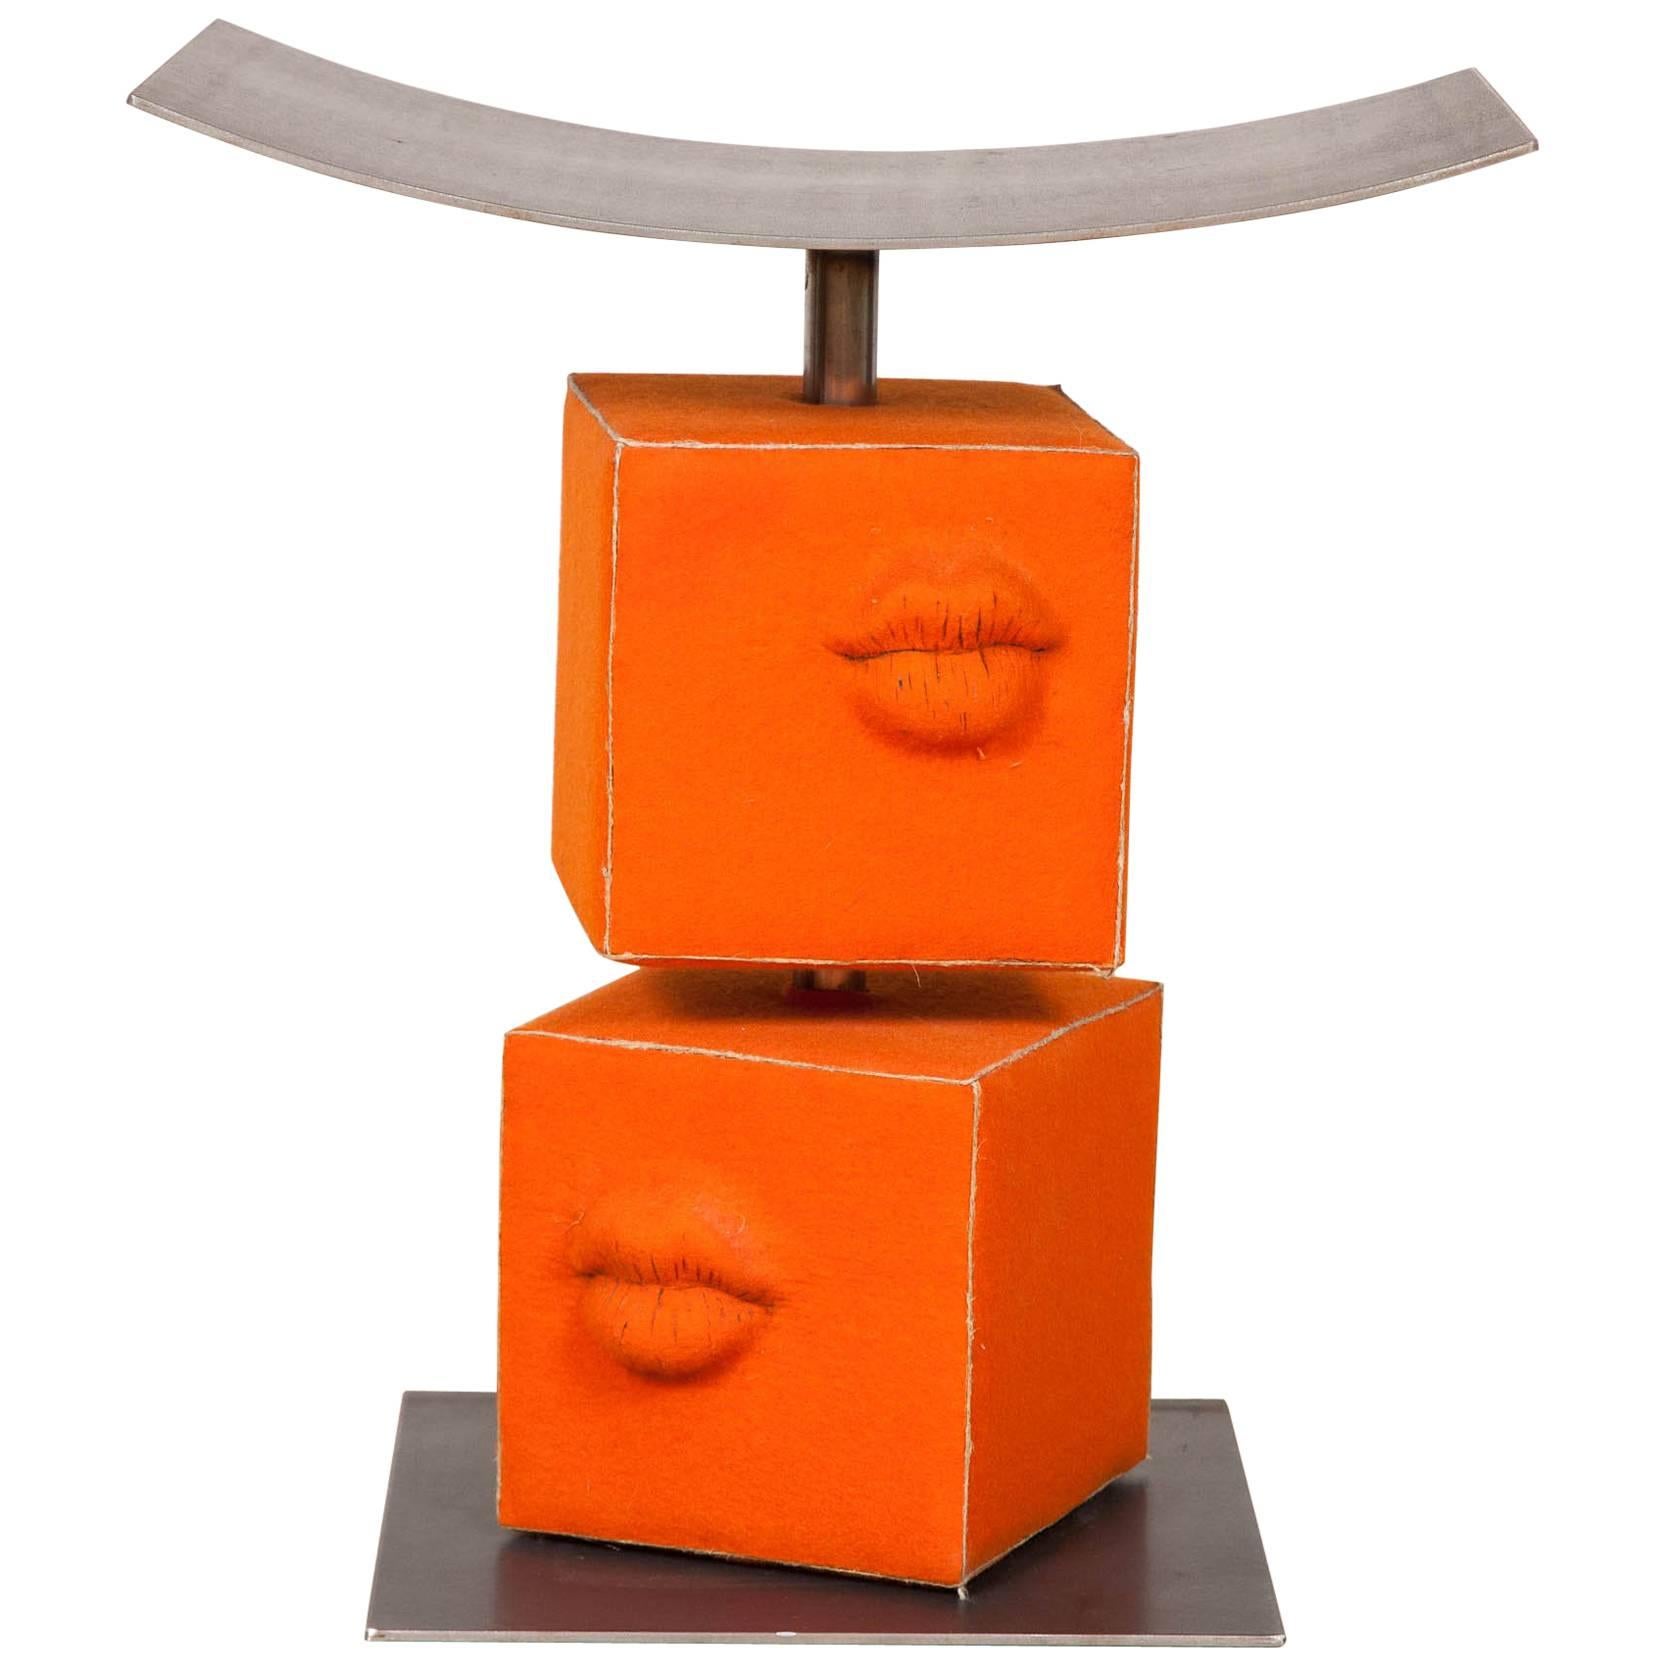 Limited Edition 'Besos' Stool by Françoise Weill